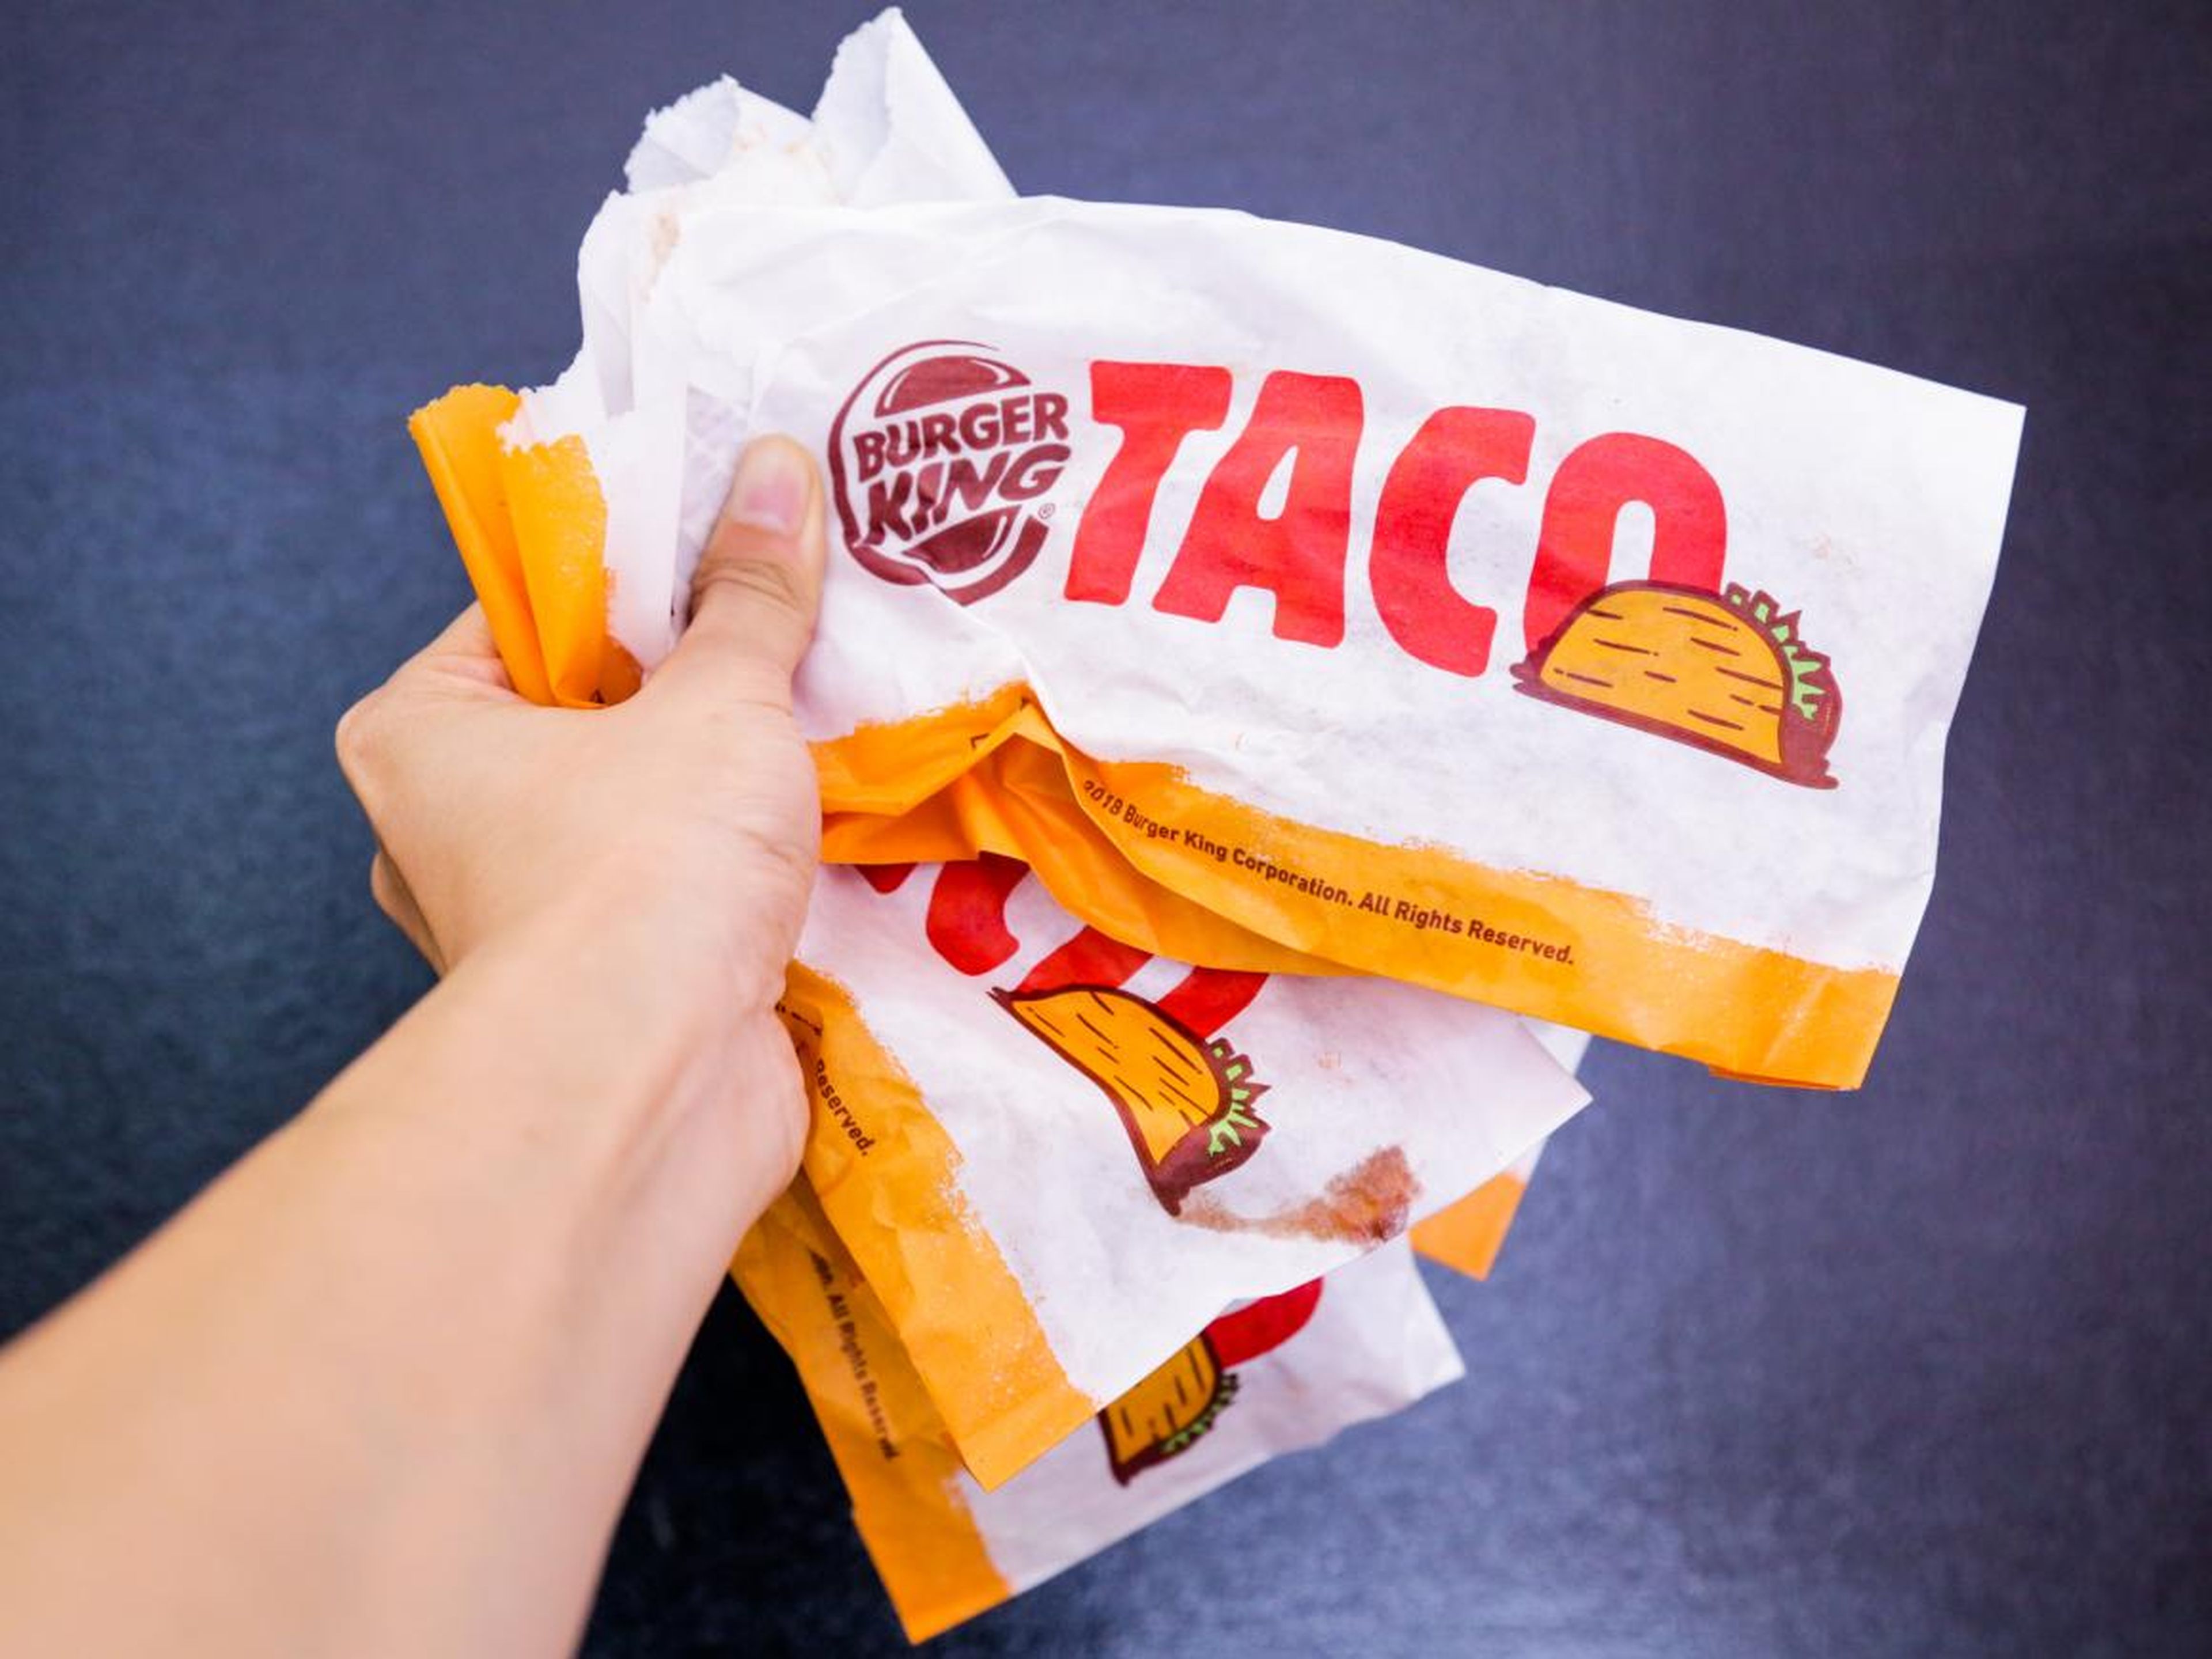 We tried Burger King's new Crispy Tacos so you don't have to.